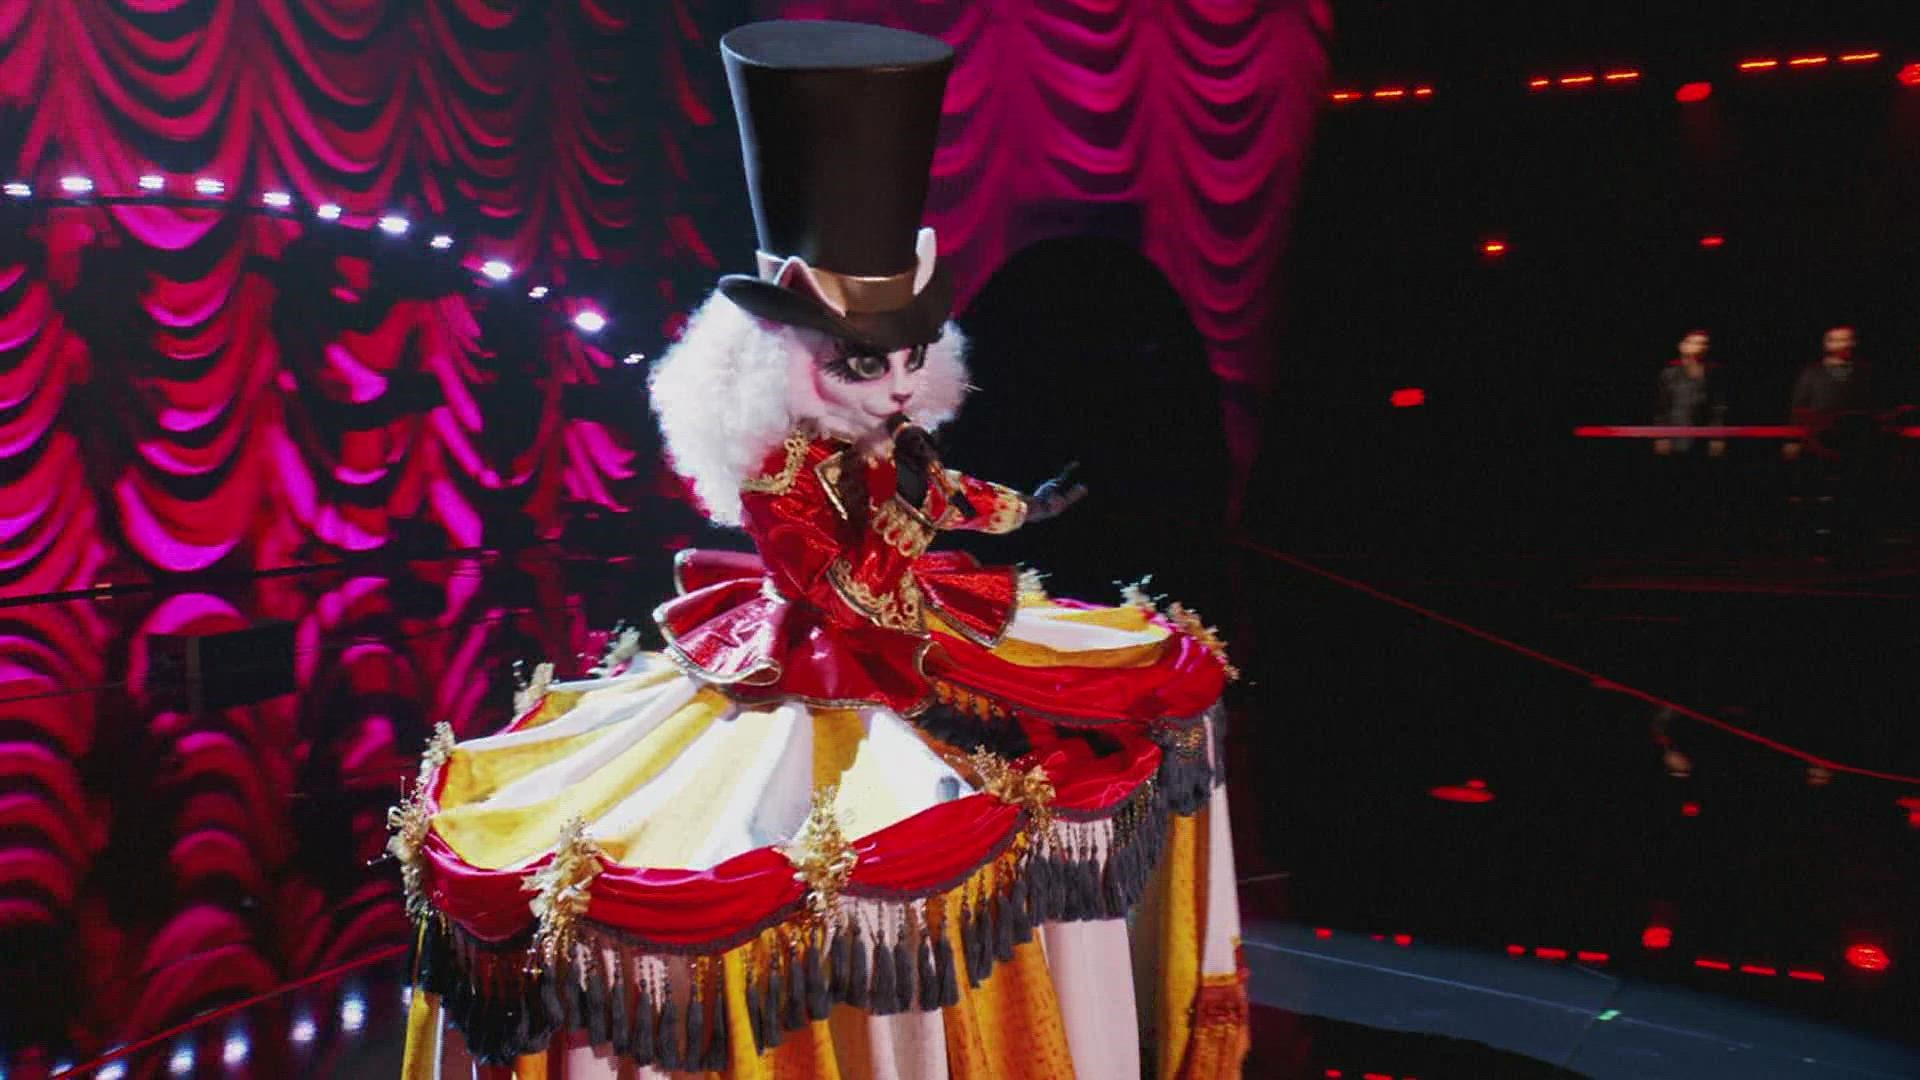 Ringmaster performs Katy Perry's "Waking Up in Vegas" in the Masked Singer finale!